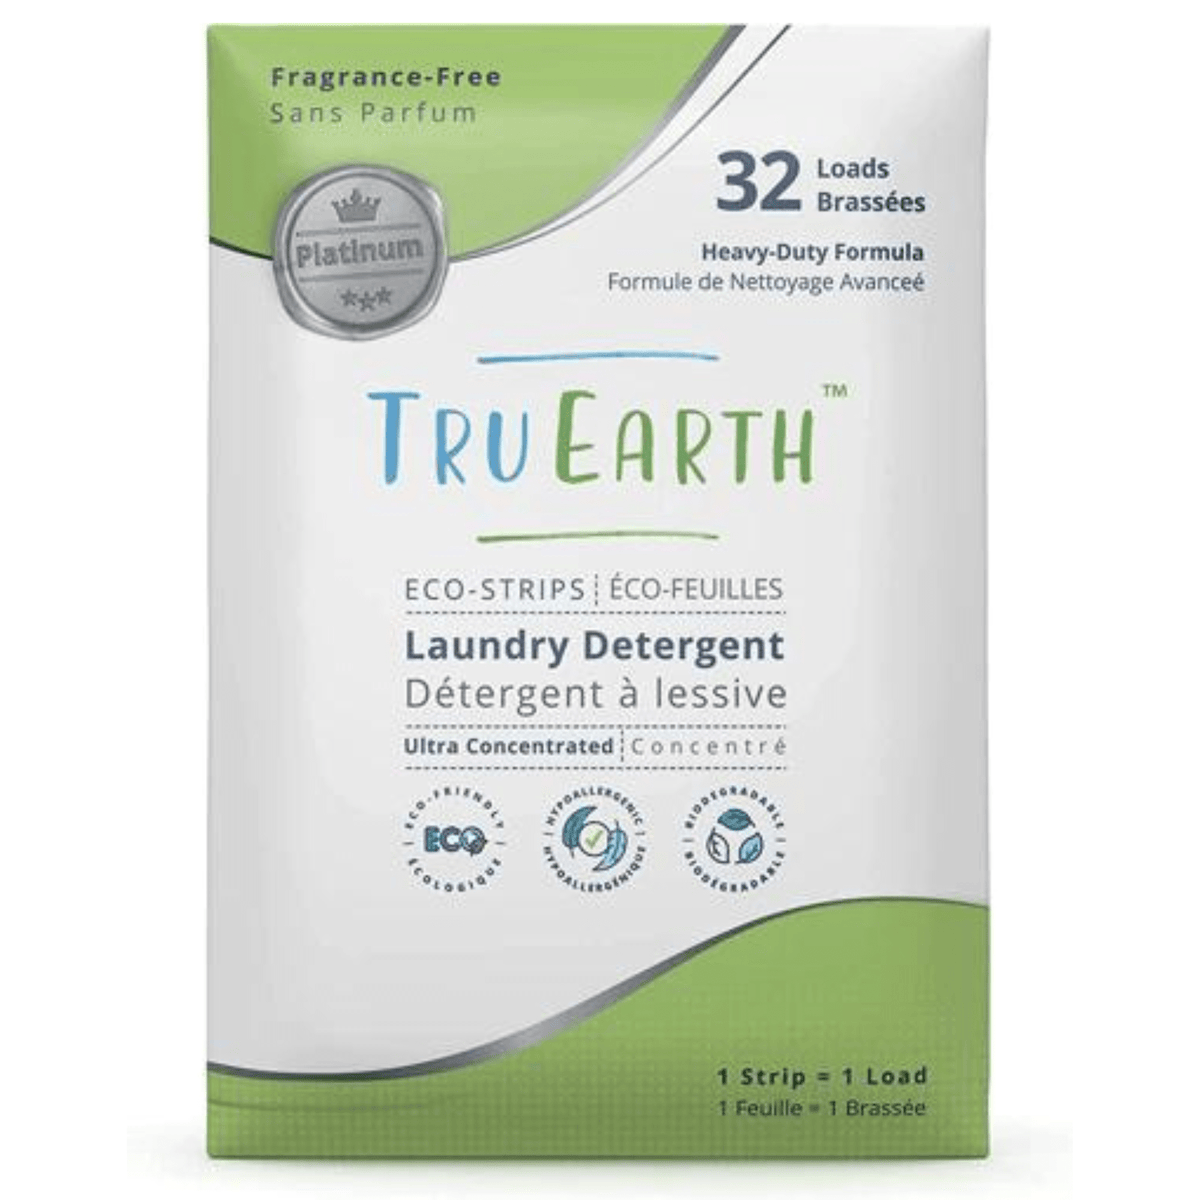 Primary Image of Eco-strips Fragrance Free Laundry Detergent